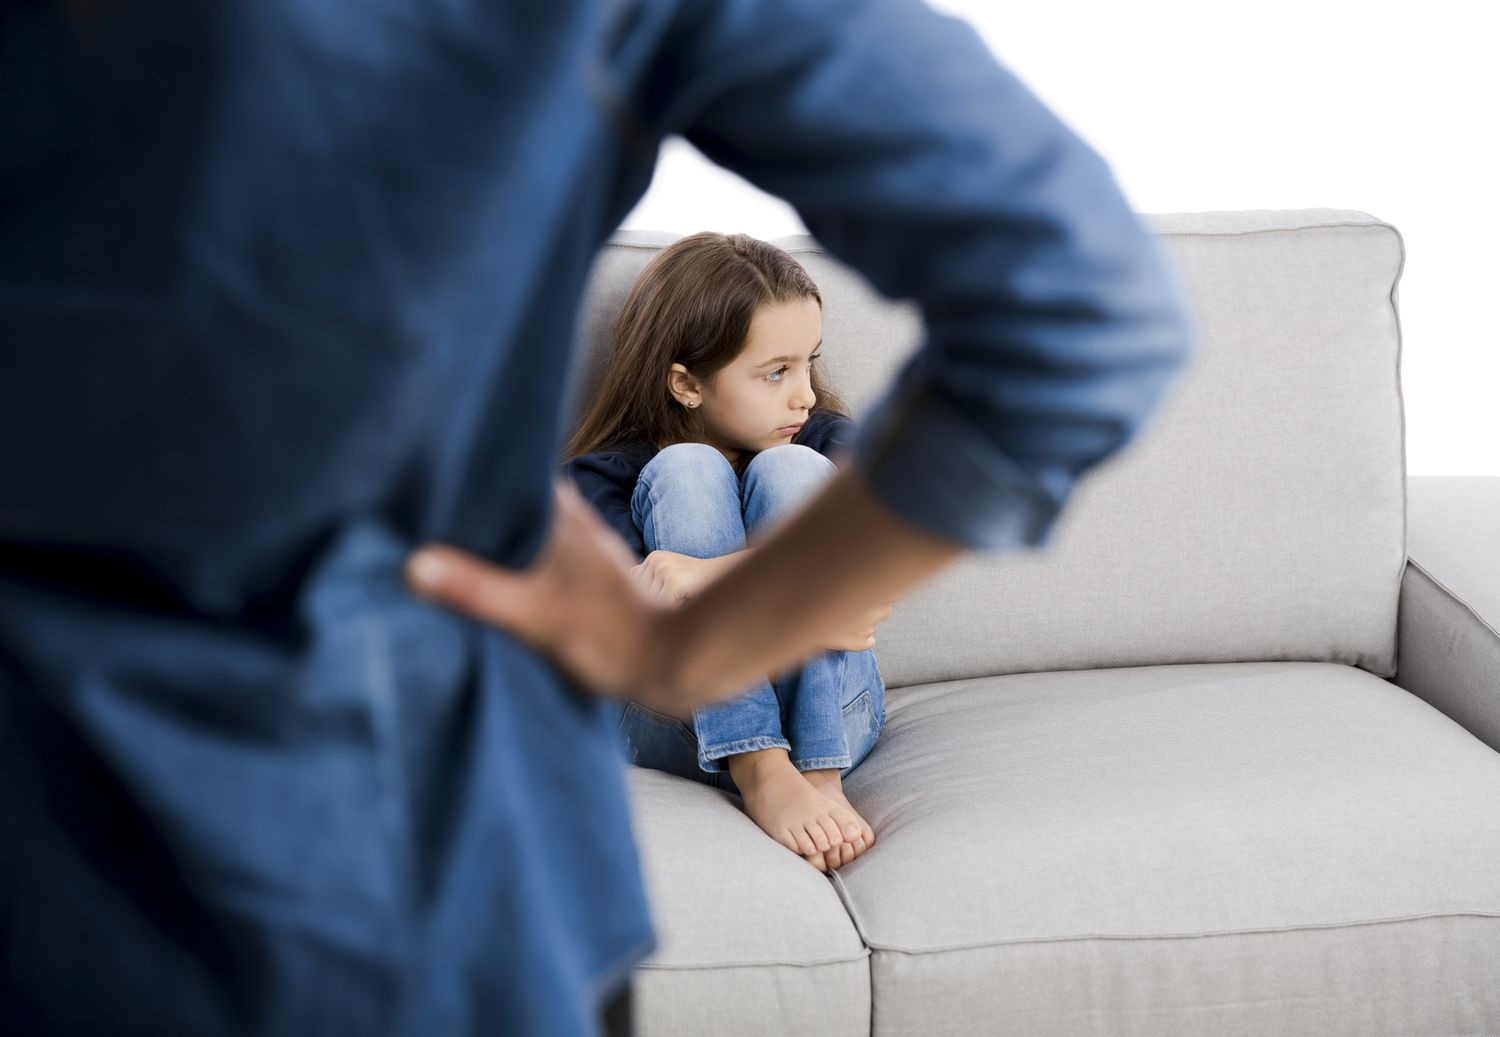 child abuse, emotionally abusive parent,parents emotional abuse